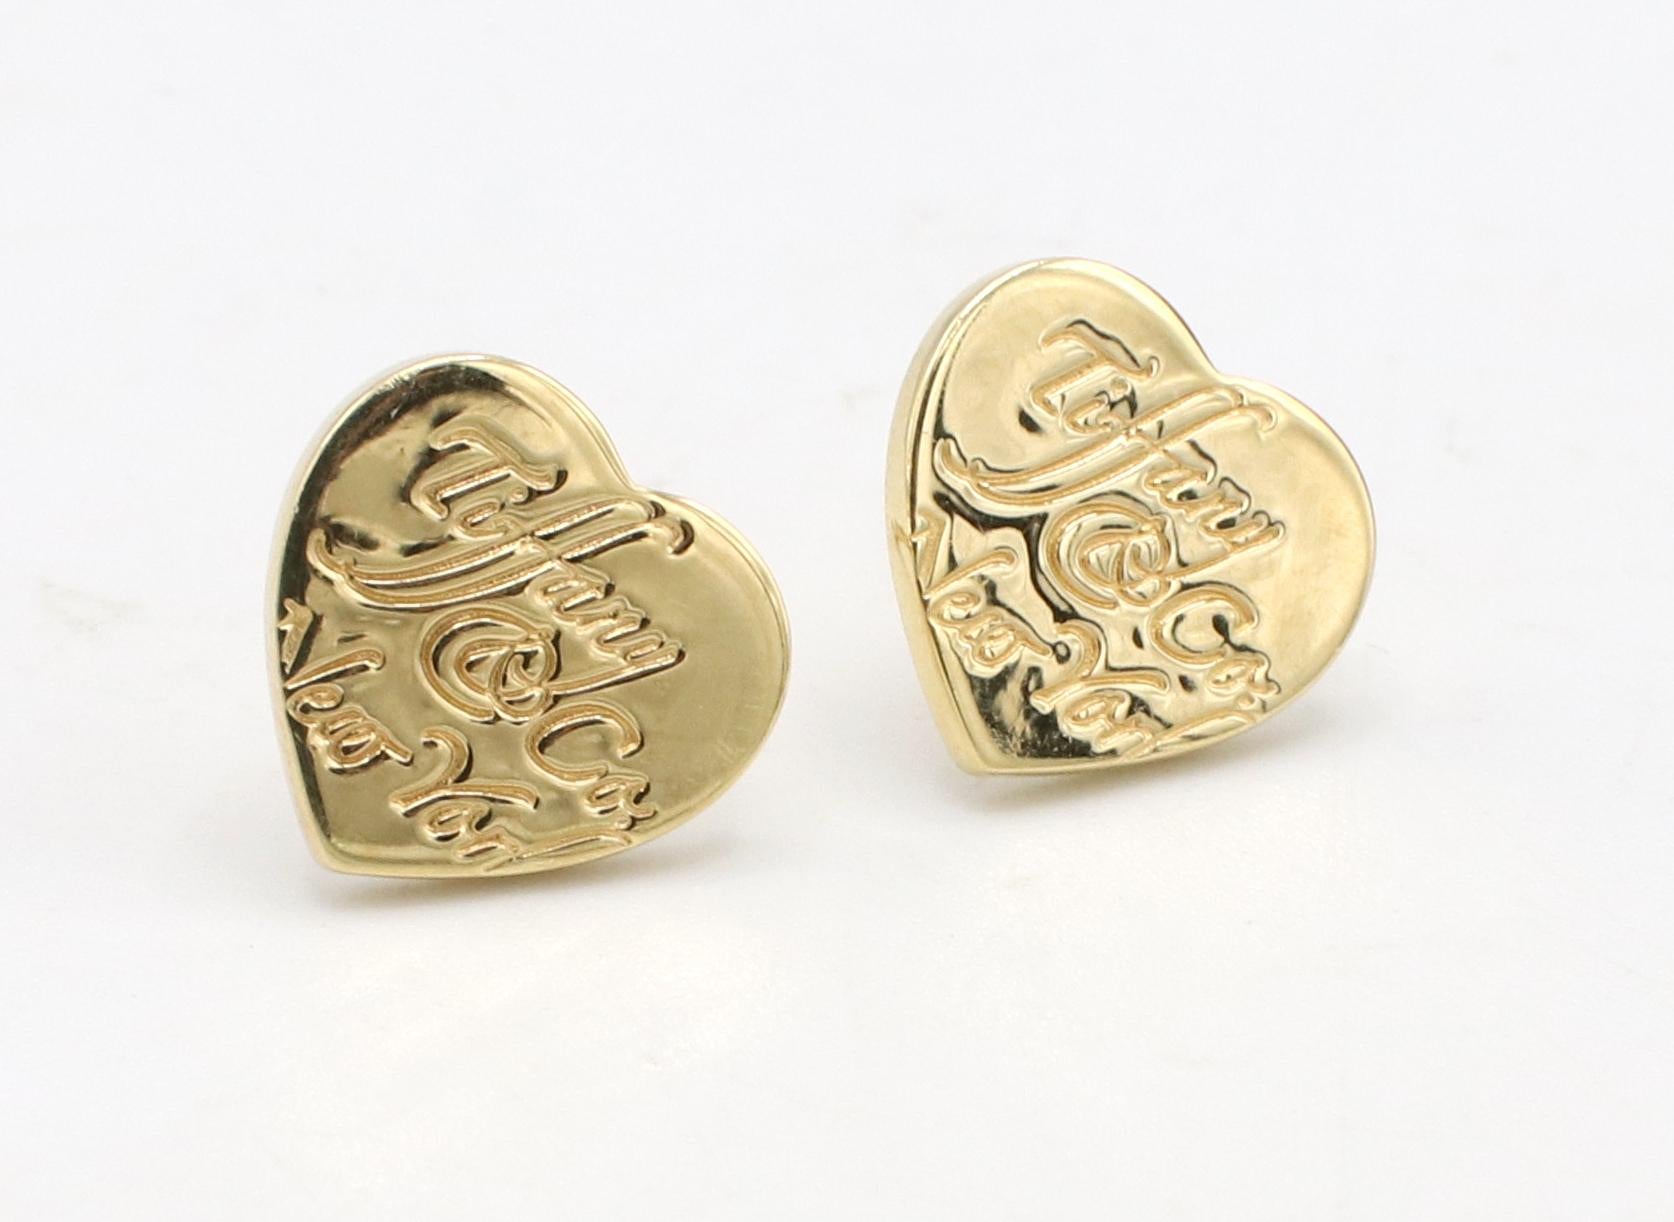 Tiffany & Co. New York Notes 18 Karat Yellow Gold Heart Logo Stud Earrings 
Metal: 18k yellow gold
Weight: 3.25 grams
Dimensions: 10 x 9.5mm
Backs: Push backs
Note: Push backs are original Tiffany & Co but slightly different sizes. An additional